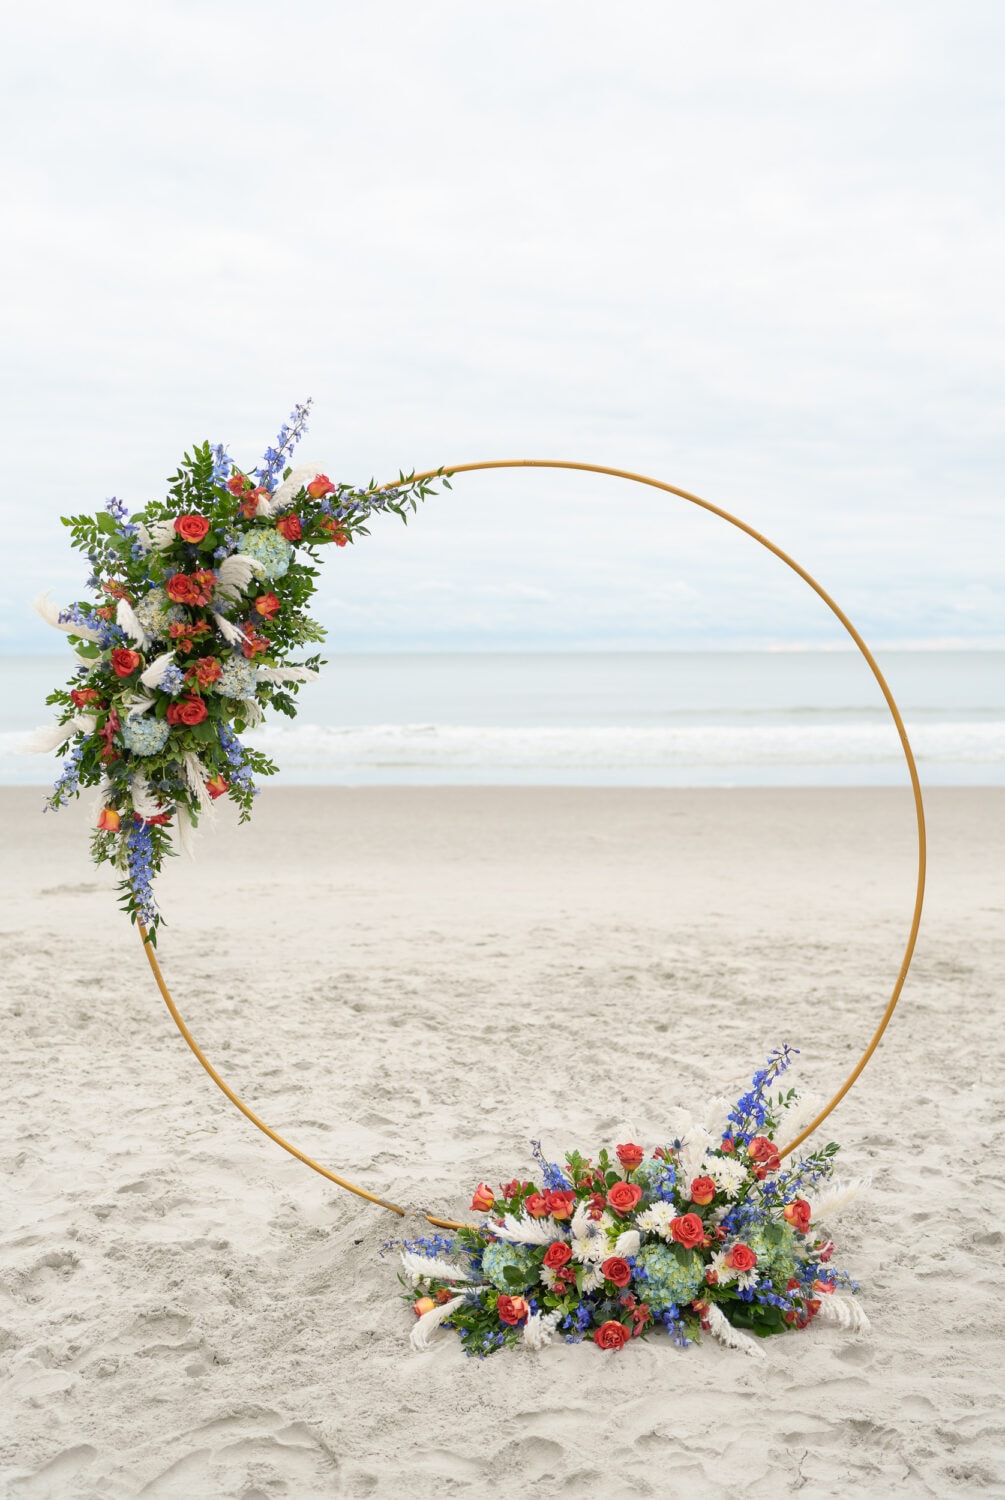 Wedding arch with flowers on the beach - 21 Main Events - North Myrtle Beach